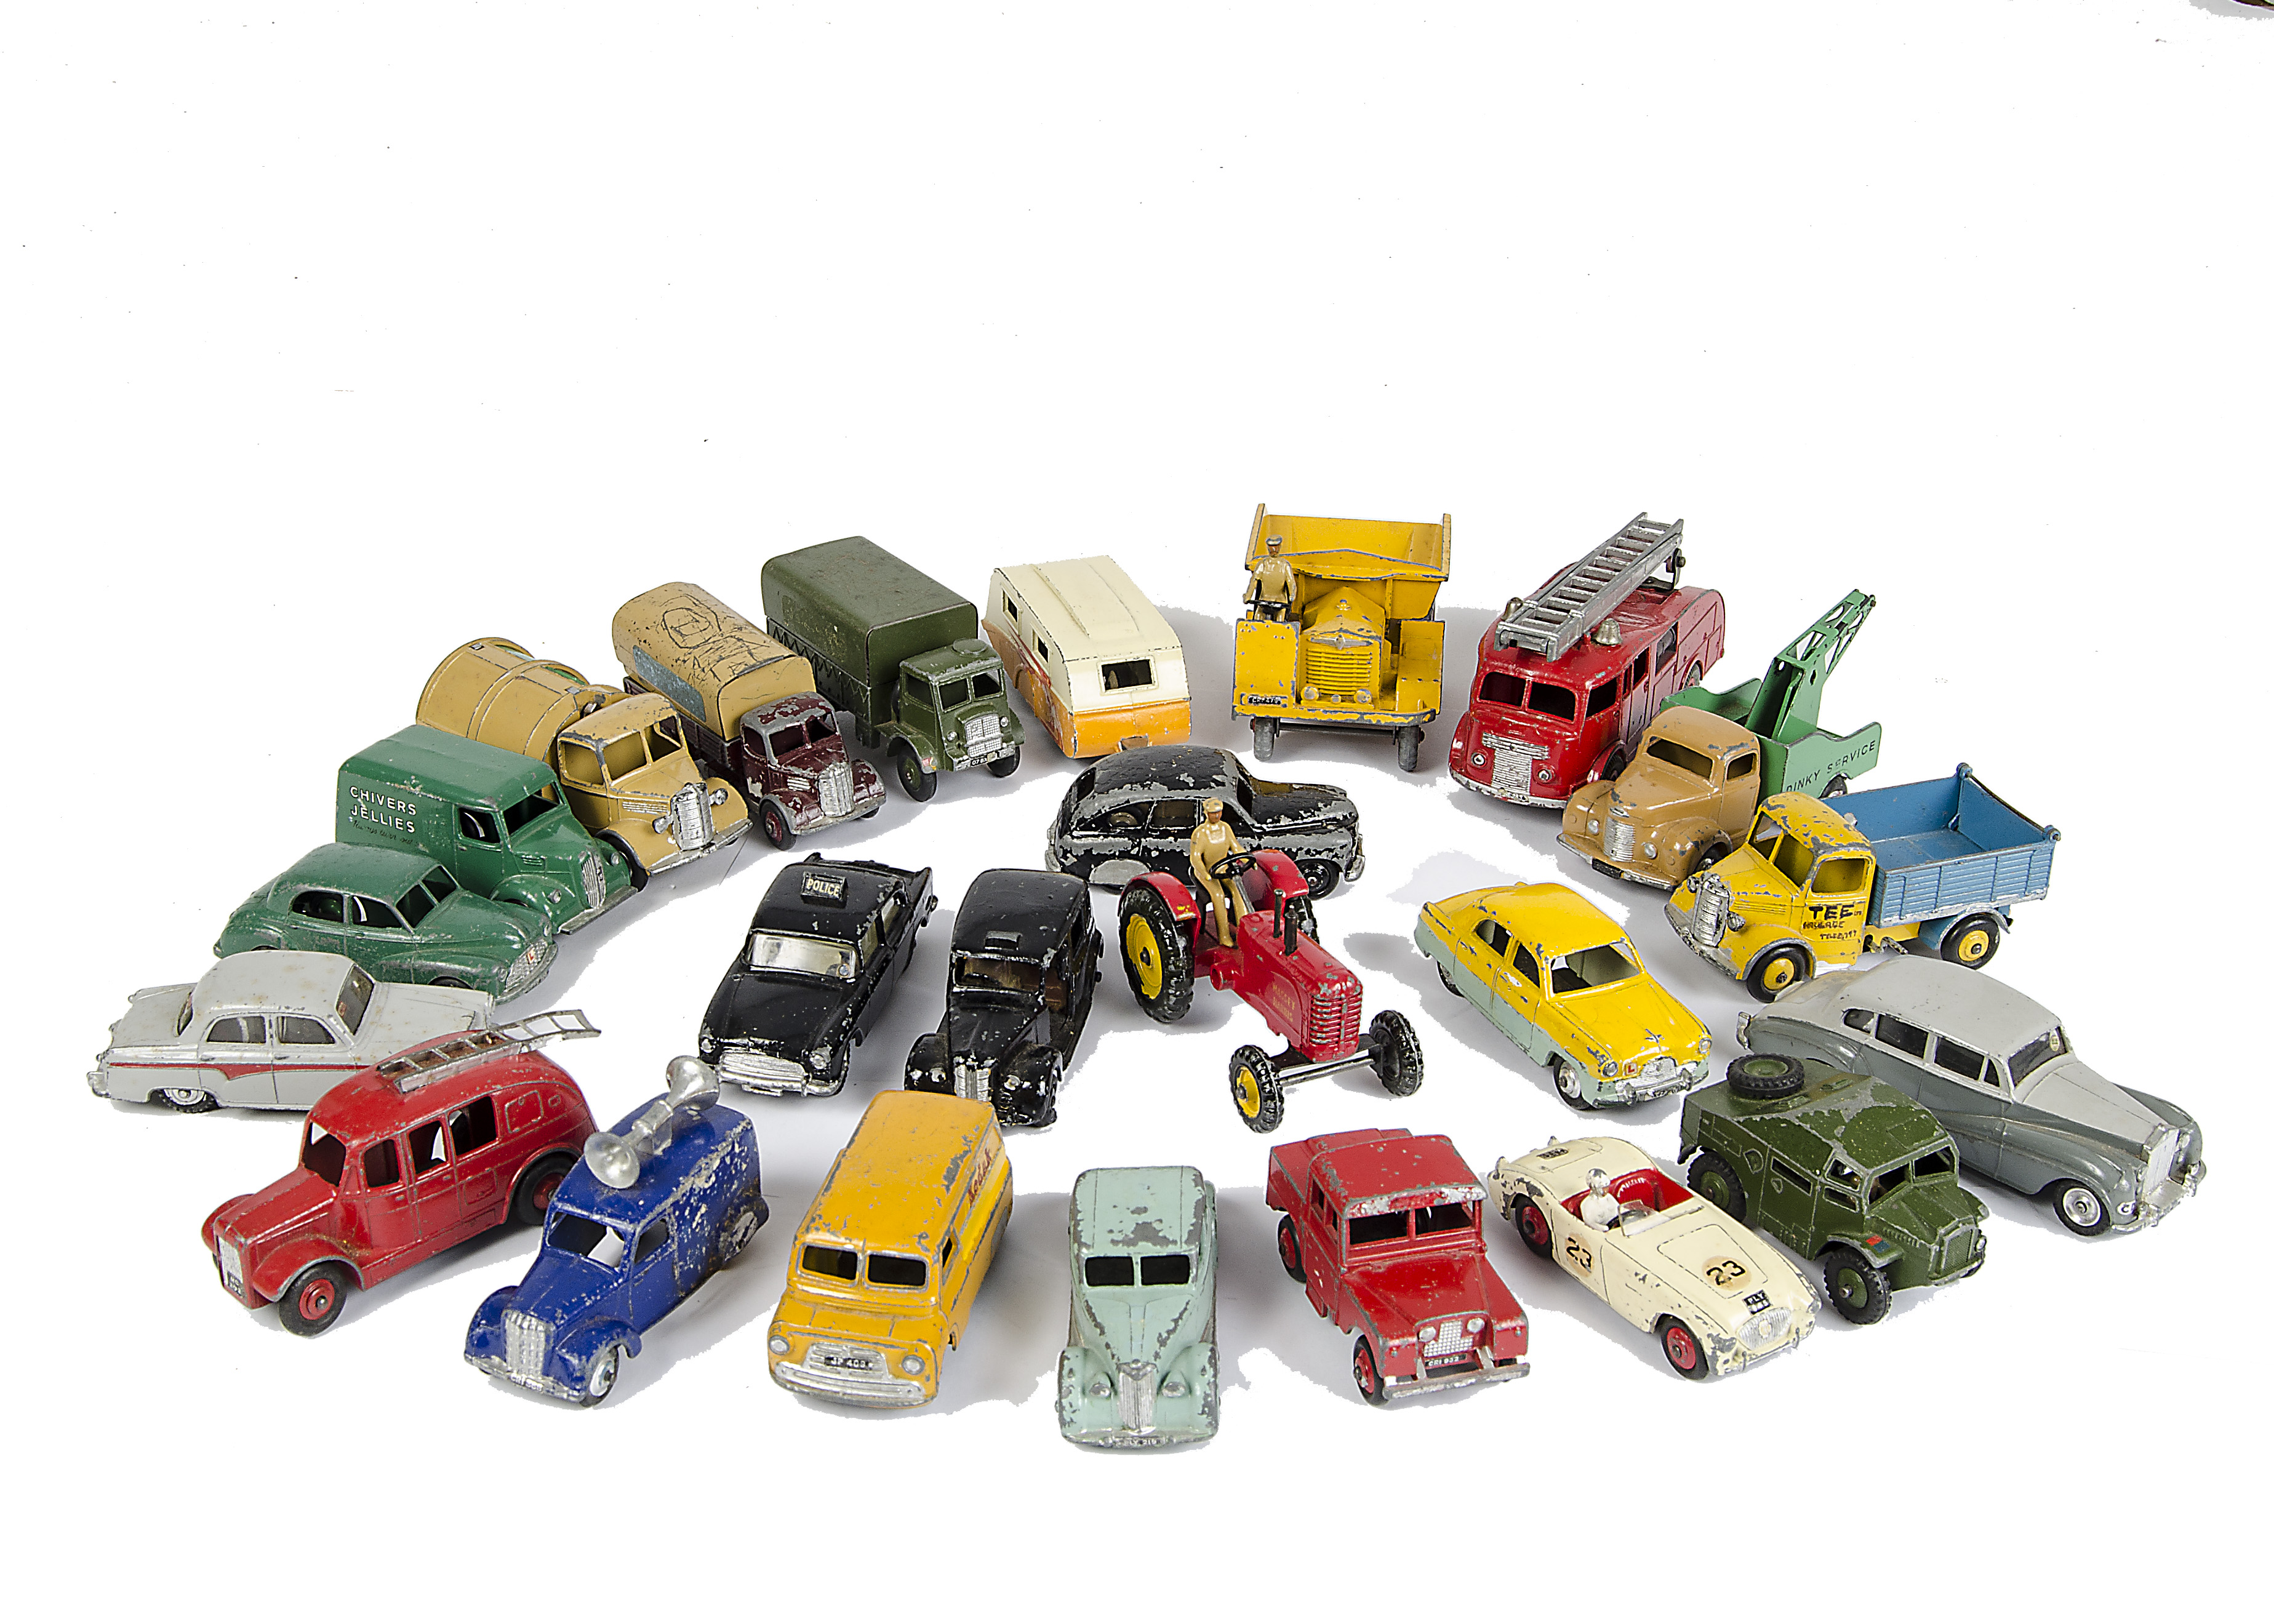 Dinky Toys Playworn Cars & Commercials, including Morris Oxford, Ford Zephyr, Trojan 'Chivers'